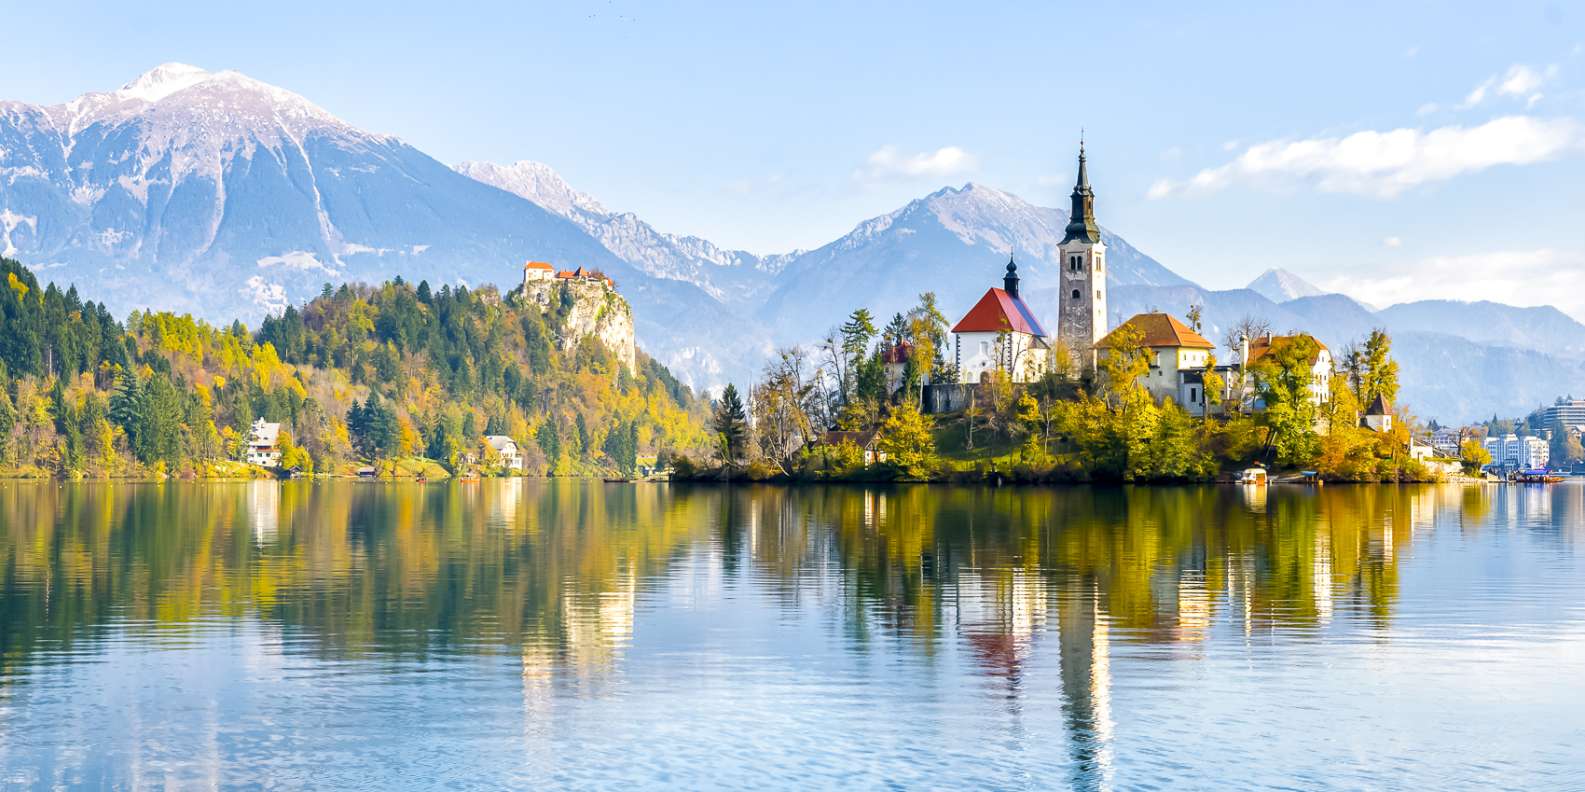 The BEST Slovenia Nature & adventure 2023 FREE Cancellation GetYourGuide